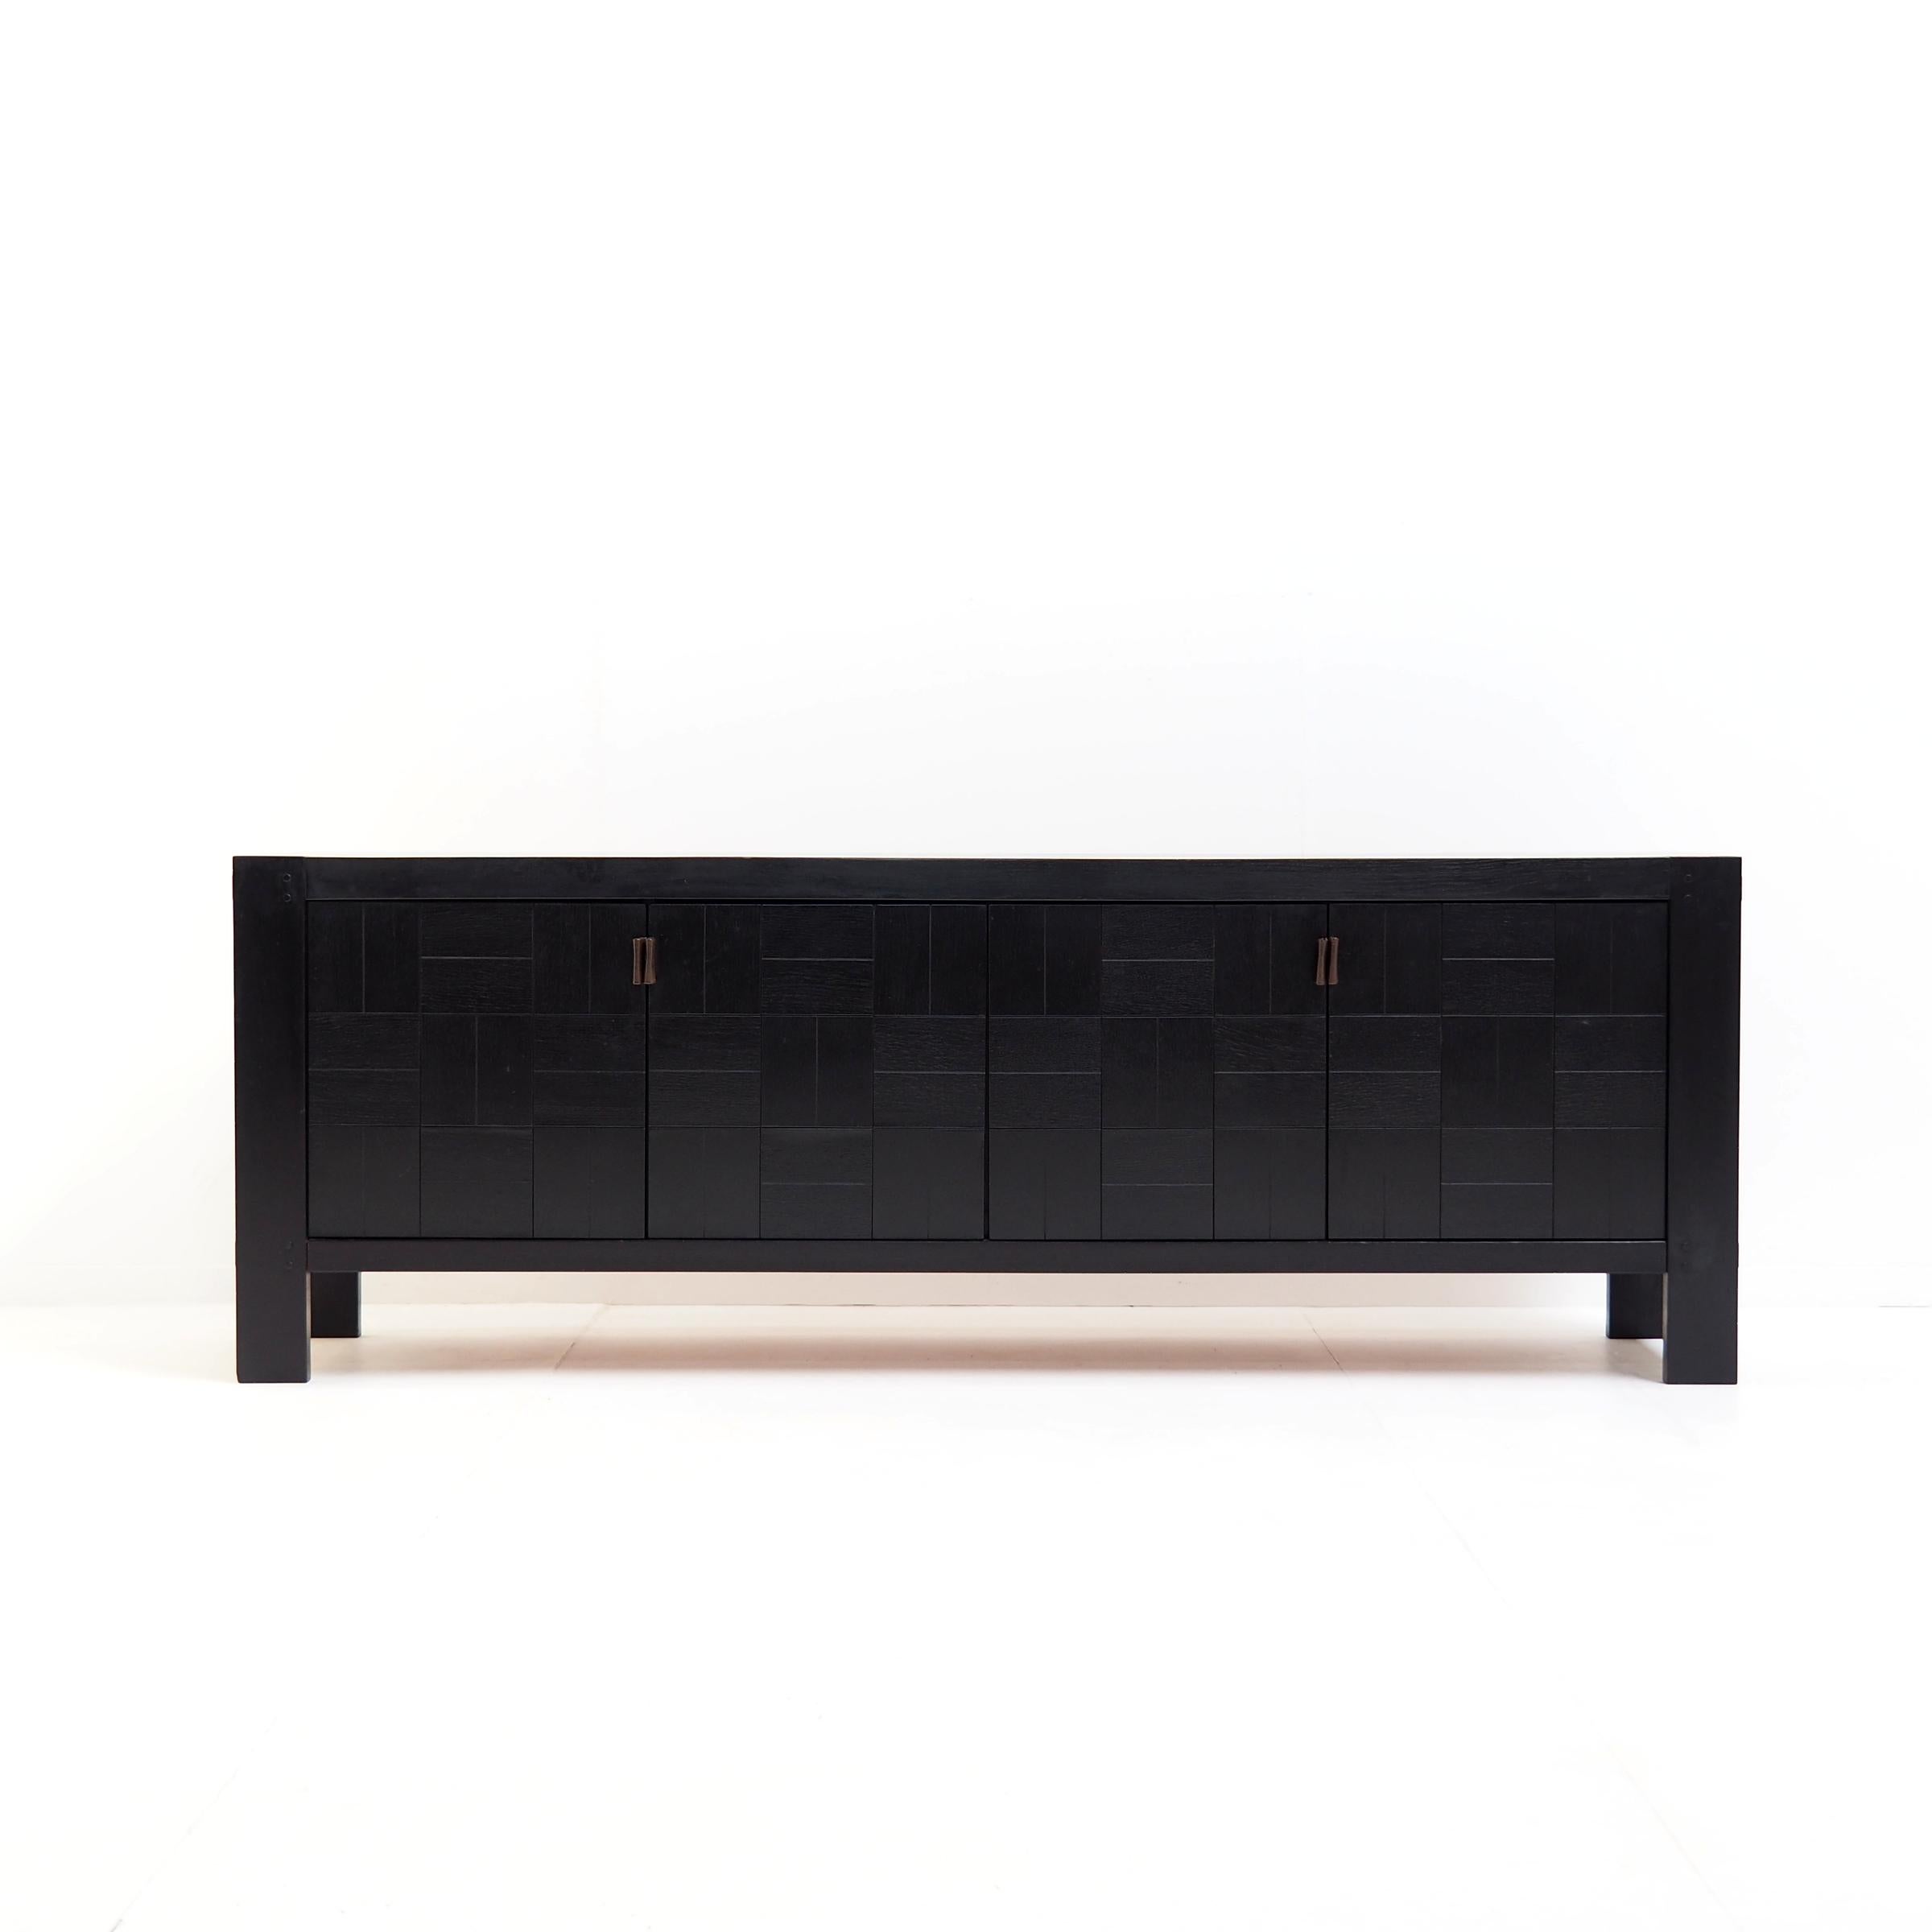 Belgian sideboard in ebonized oak designed in the 1970s by Frans Defour for Defour.

The sideboard is made of a solid oak frame with oak veneer door panels that show a graphic design. The door handles are made of leather, which contrasts very